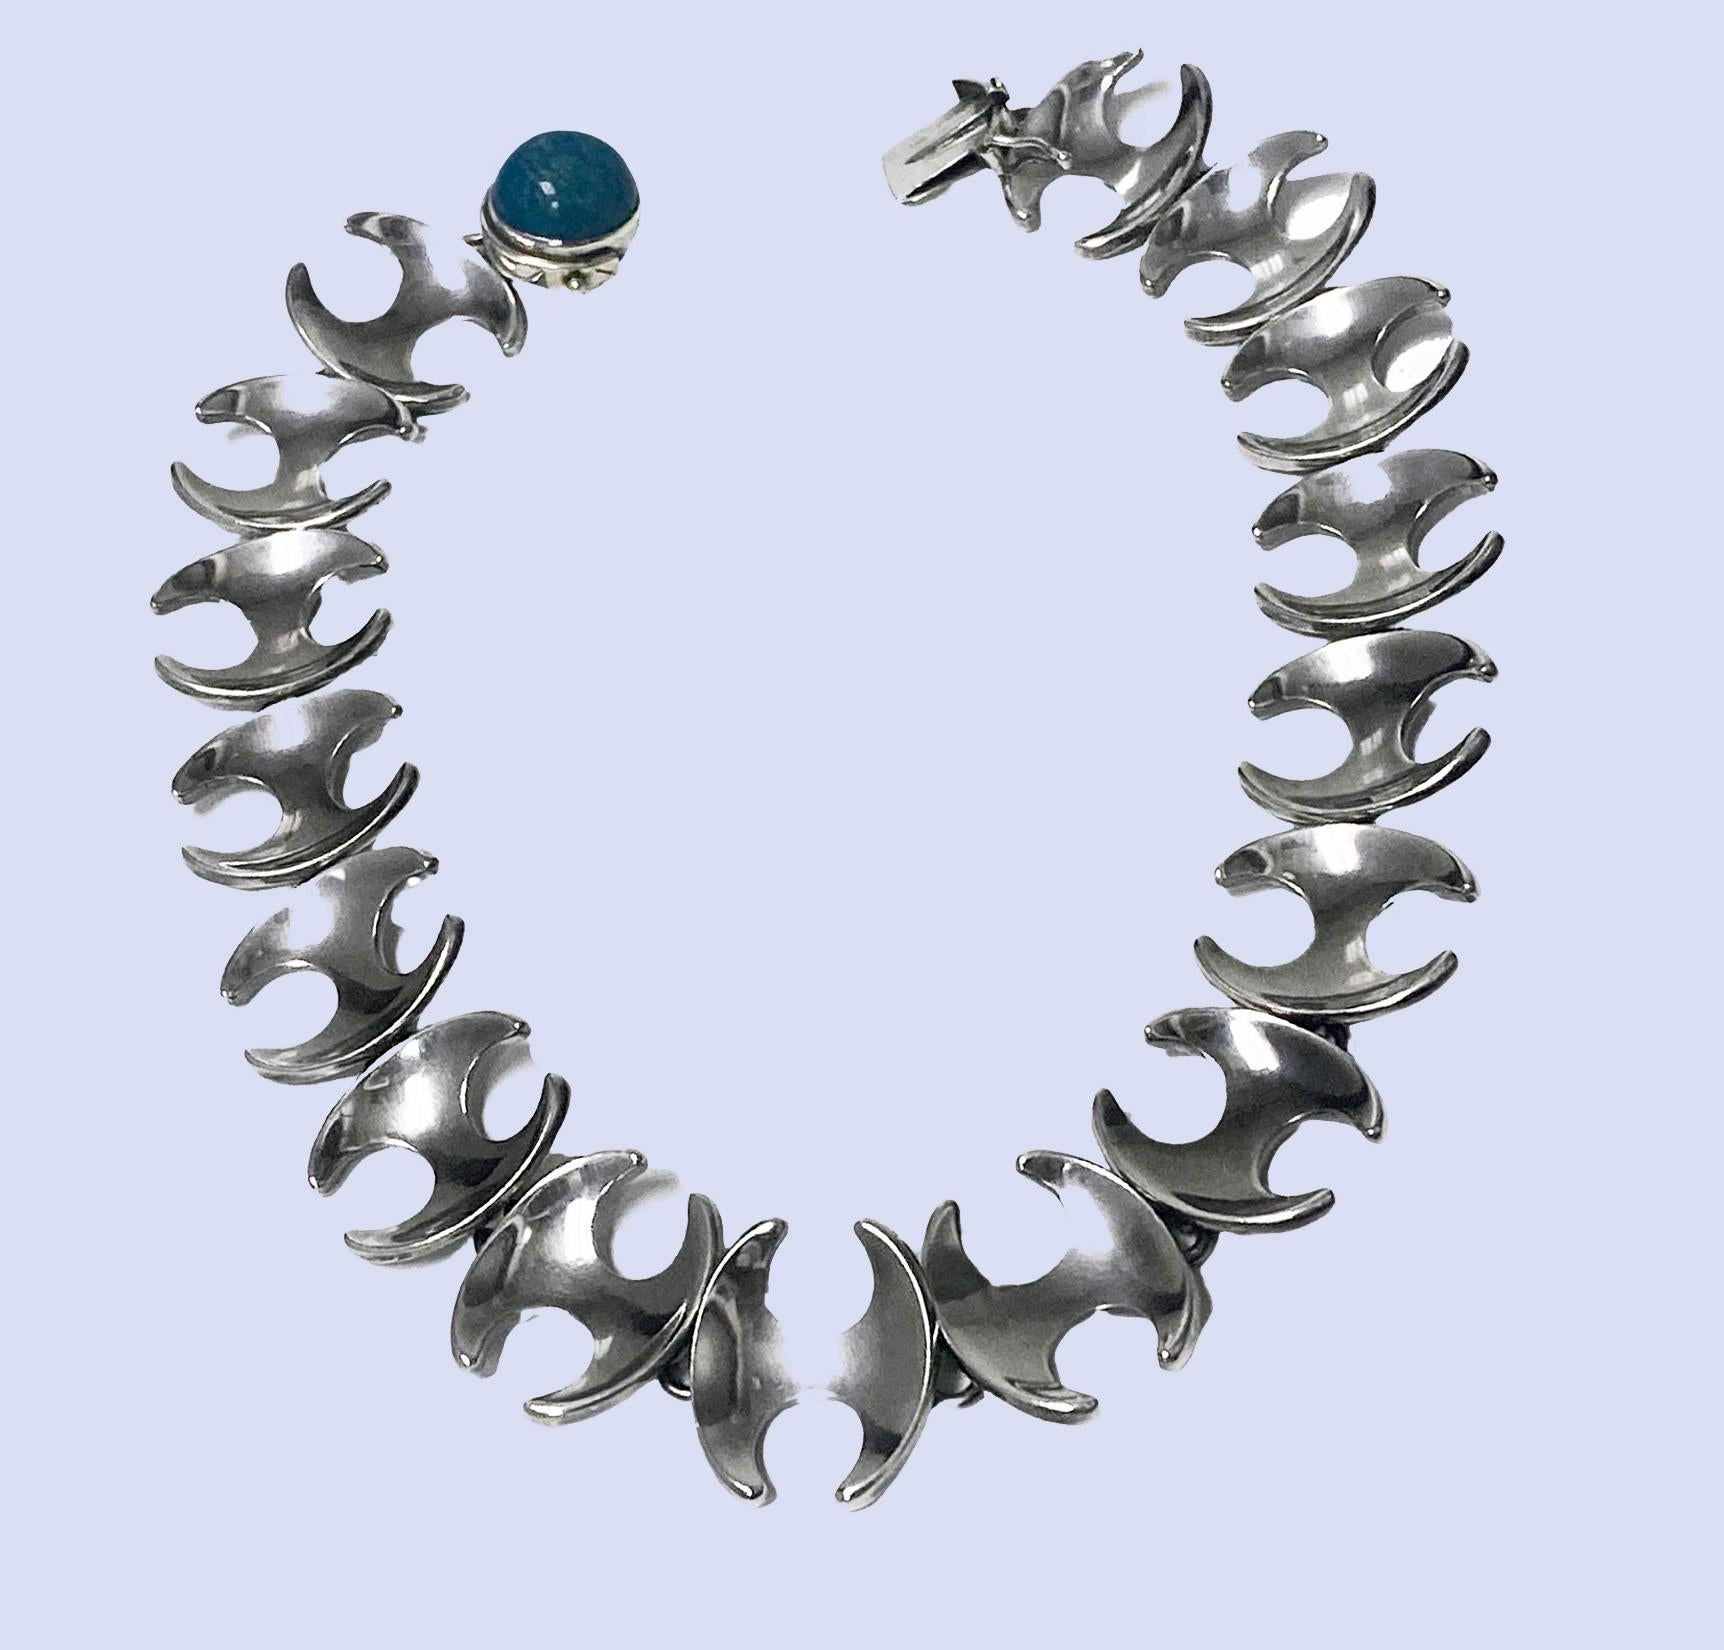 Rare 1950's Vintage Georg Jensen Henning Koppel Sterling Silver Necklace is set with amazonite clasp. Designed by Henning Koppel in Koppel’s signature H design for Georg Jensen. Post 1945 Georg Jensen mark and 925S Sterling Denmark design number130B